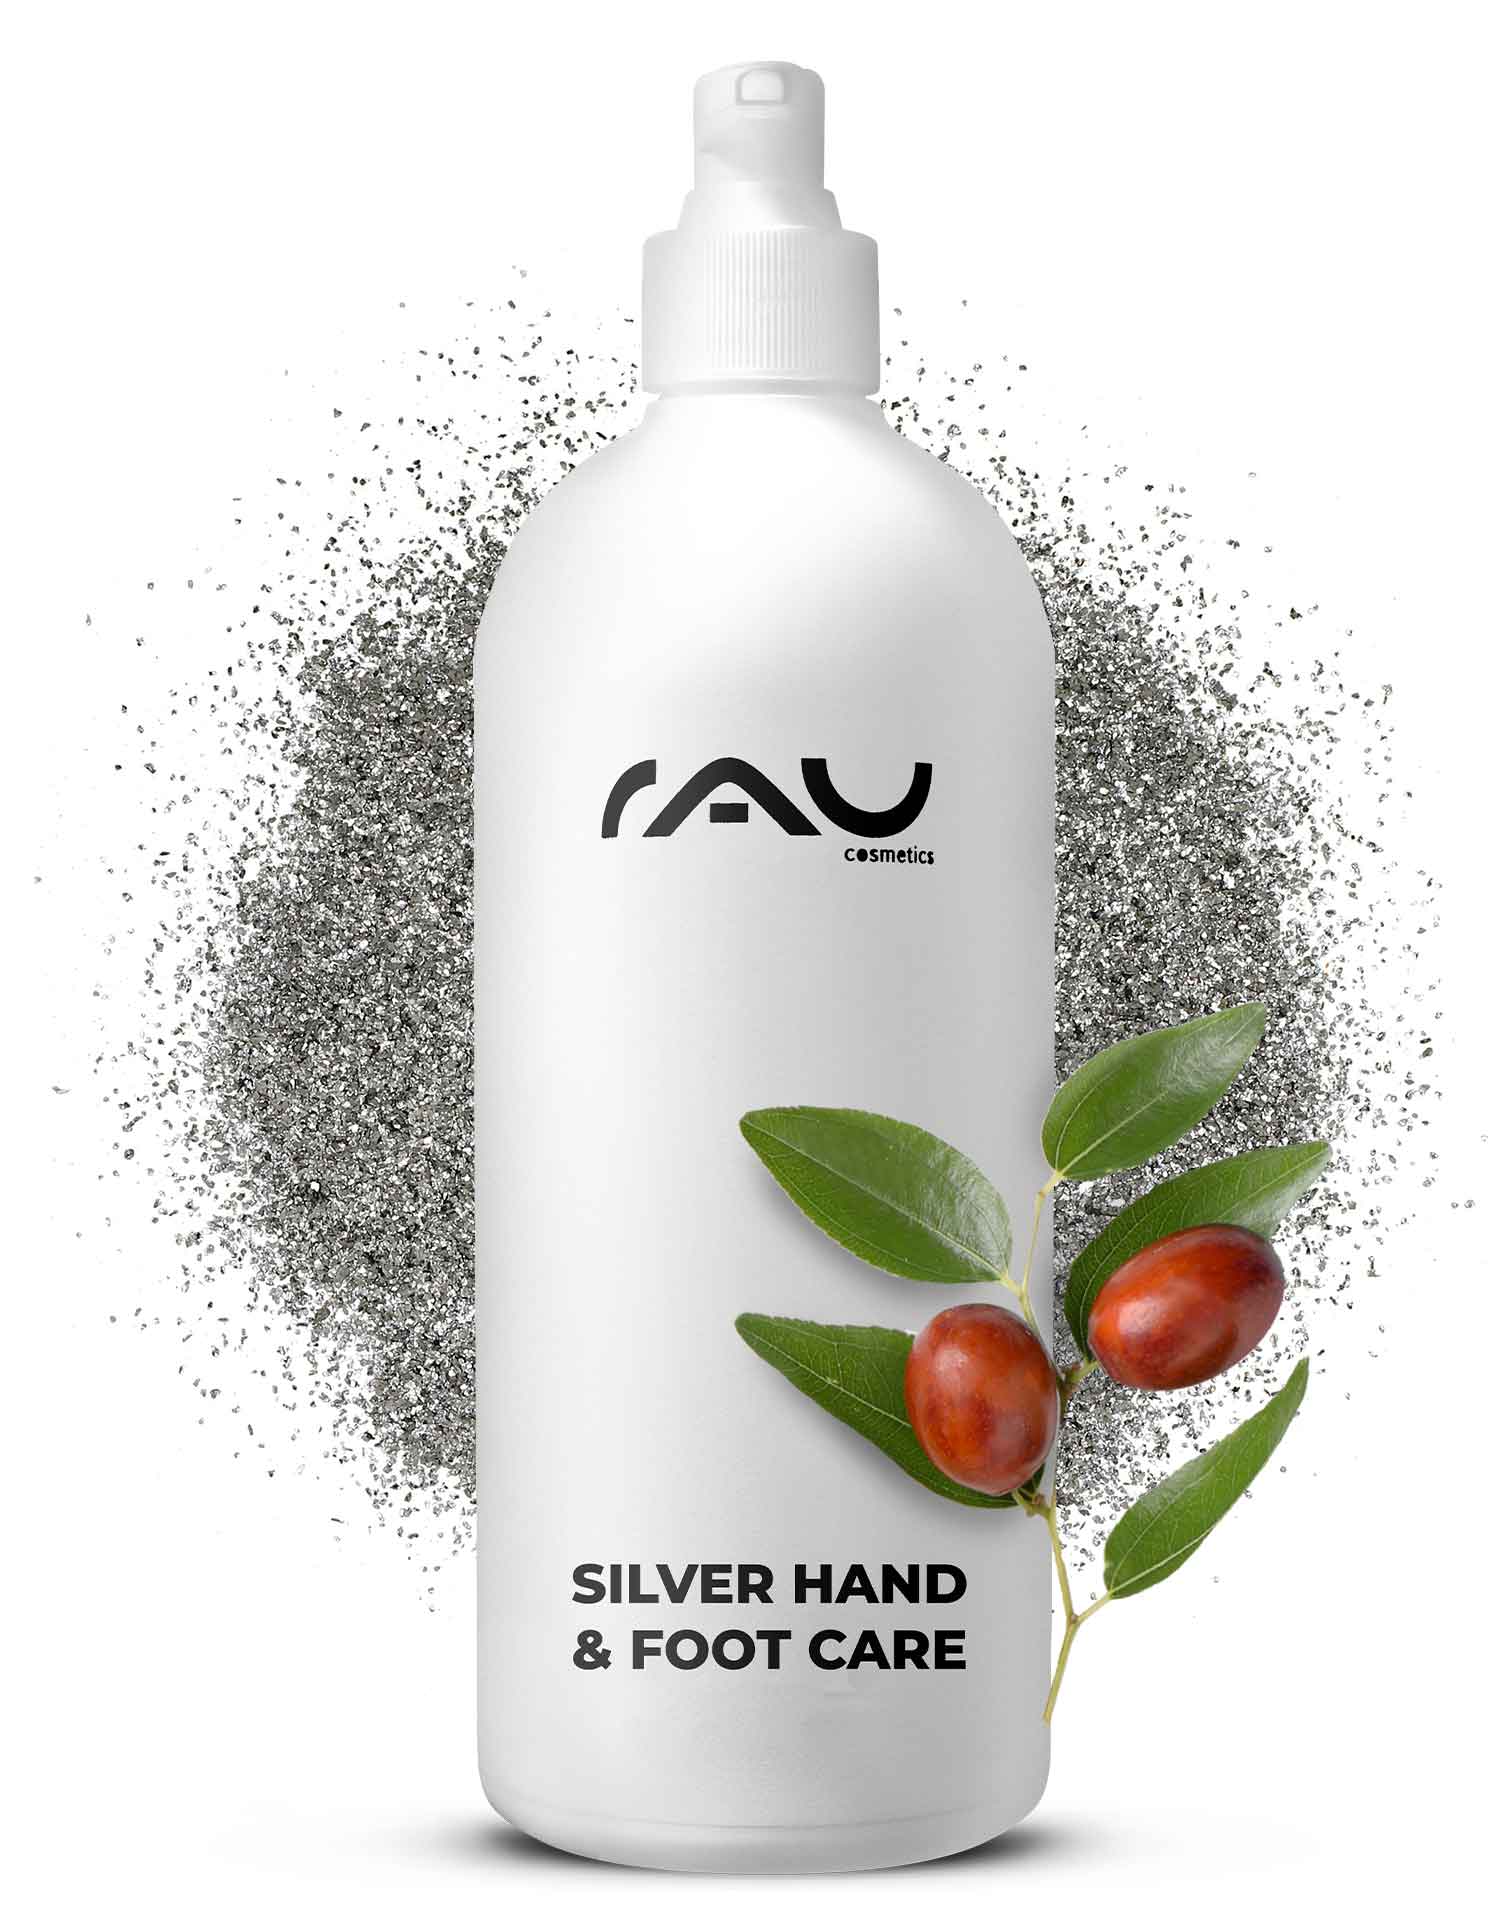 RAU Silver Hand & Foot Care 500 ml PROFILINE - Cabinware - For Soft and Protected Hands & Feet with SPF